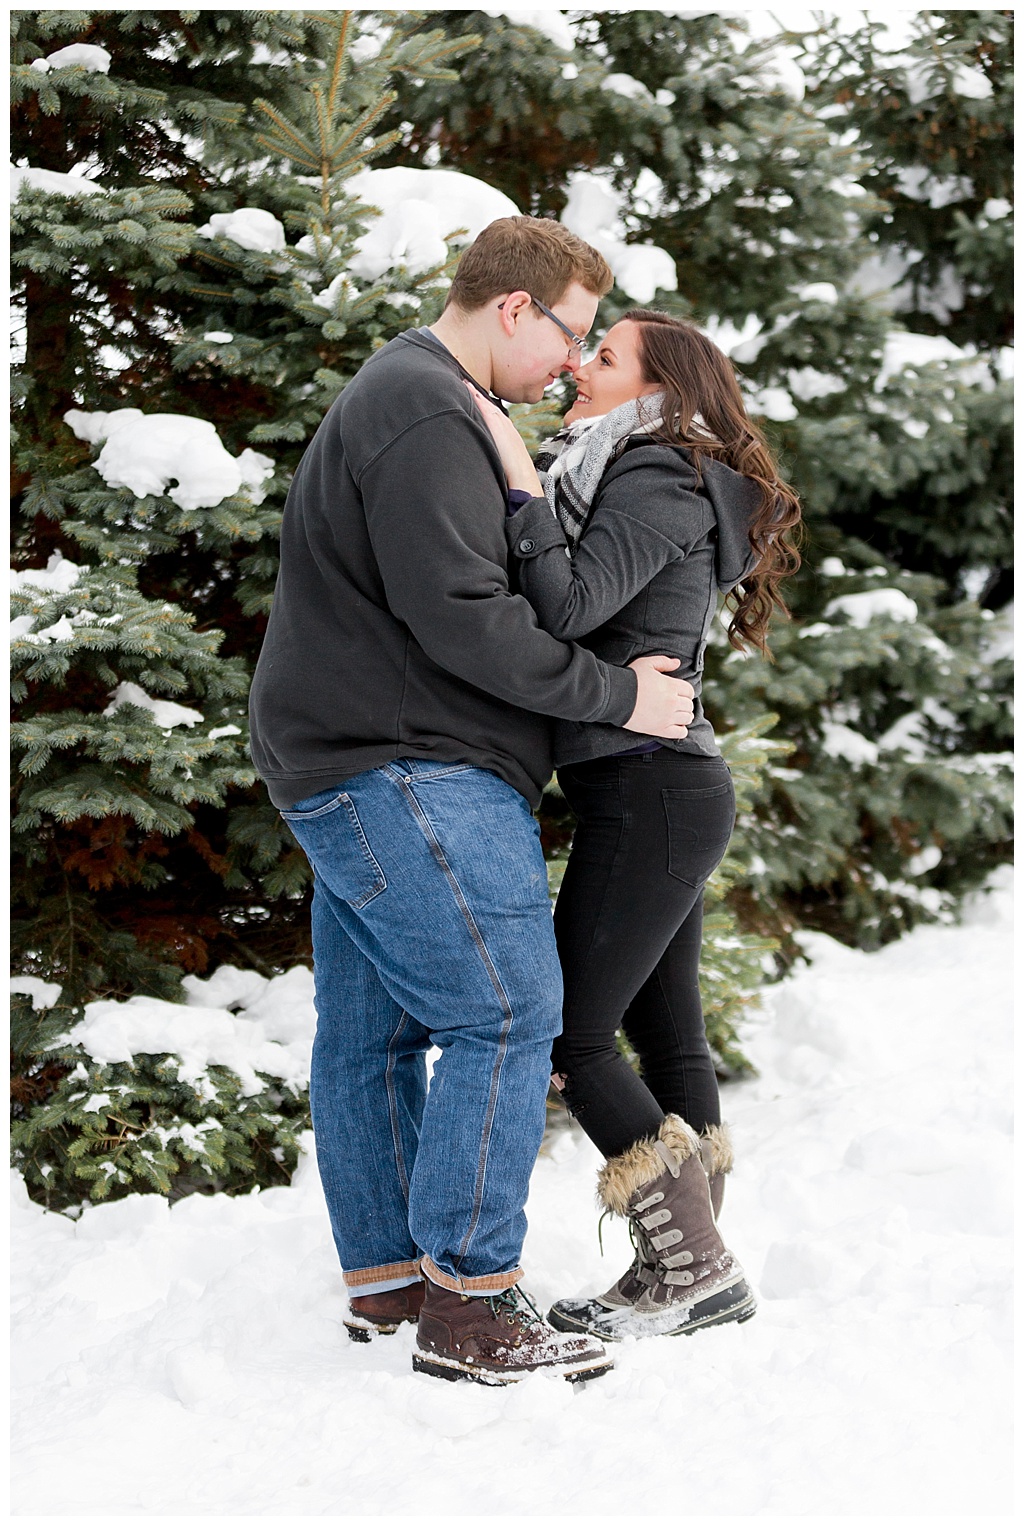 Joe and Revae Winter Engagement. Minnesota Engagement Photographer, engagement, engagement photography, engagement pics, Couples photography, engagement poses, posing, outfit ideas, intimate photography, lighting, couple poses, couples outfits, engagement session, mn photographer